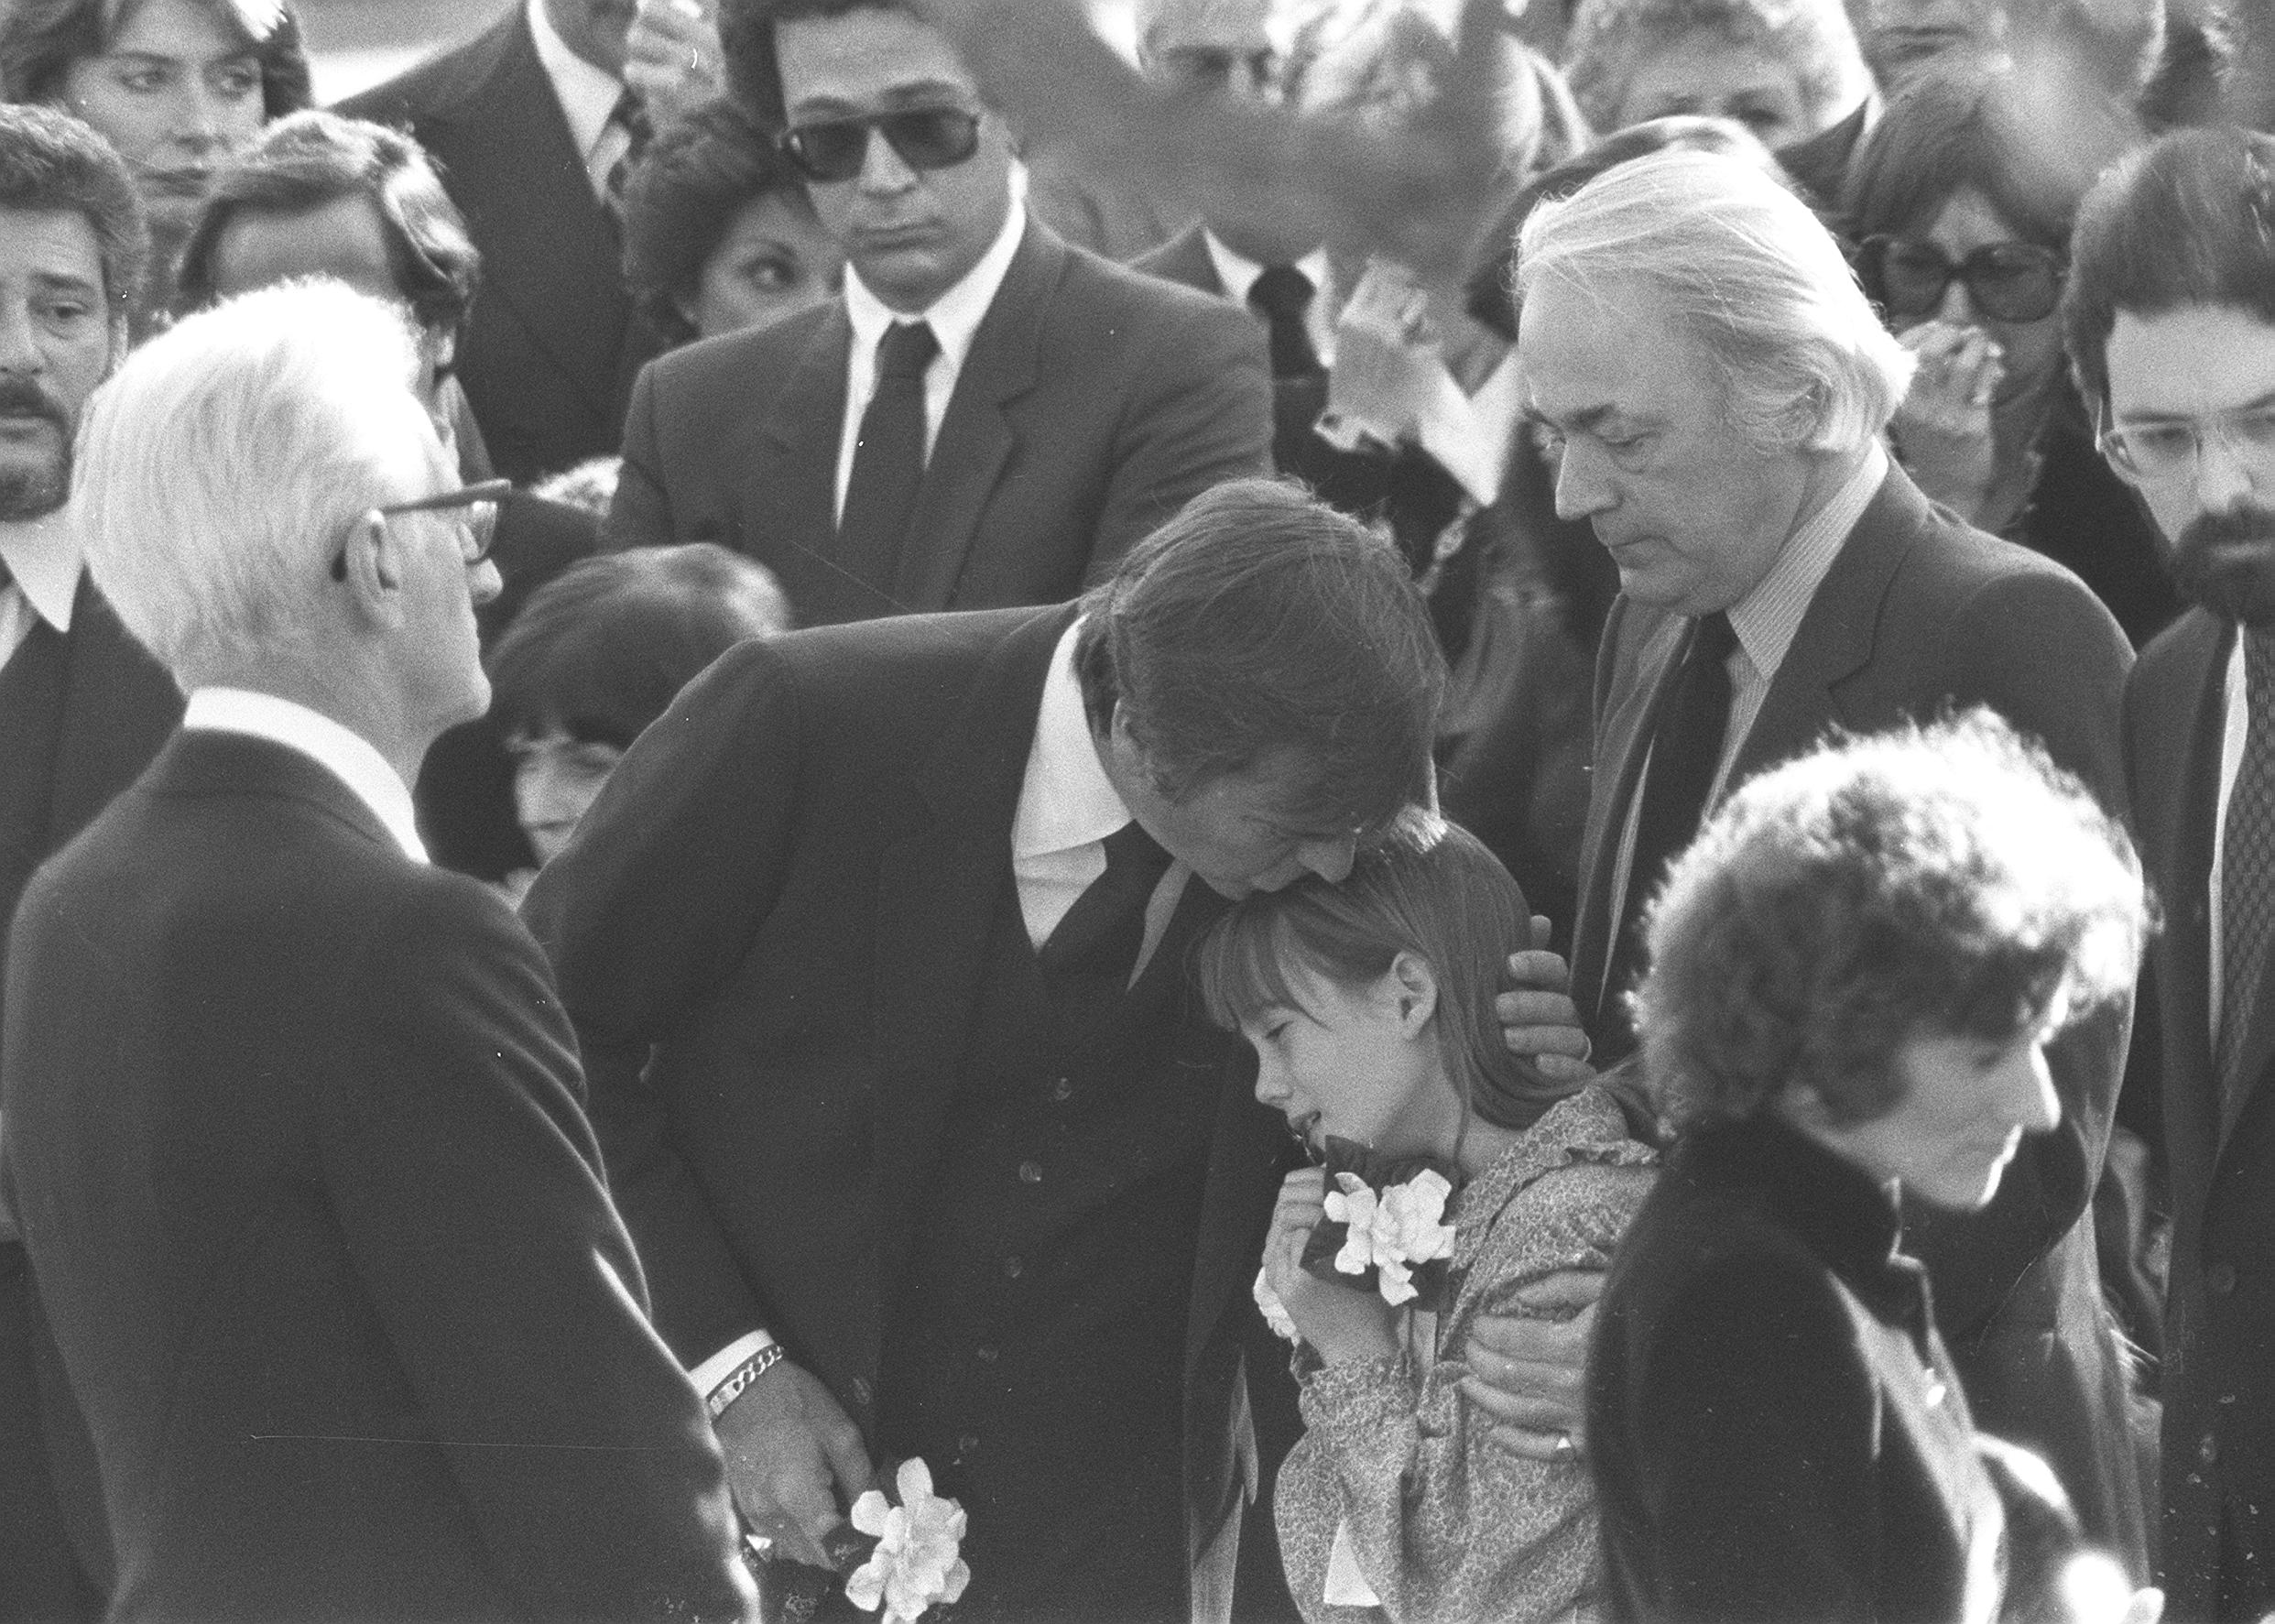 Robert Wagner comforts his daughter Courtney Brooke Wagner at Natalie Wood's funeral in December 1981 ┃Source: Getty Images